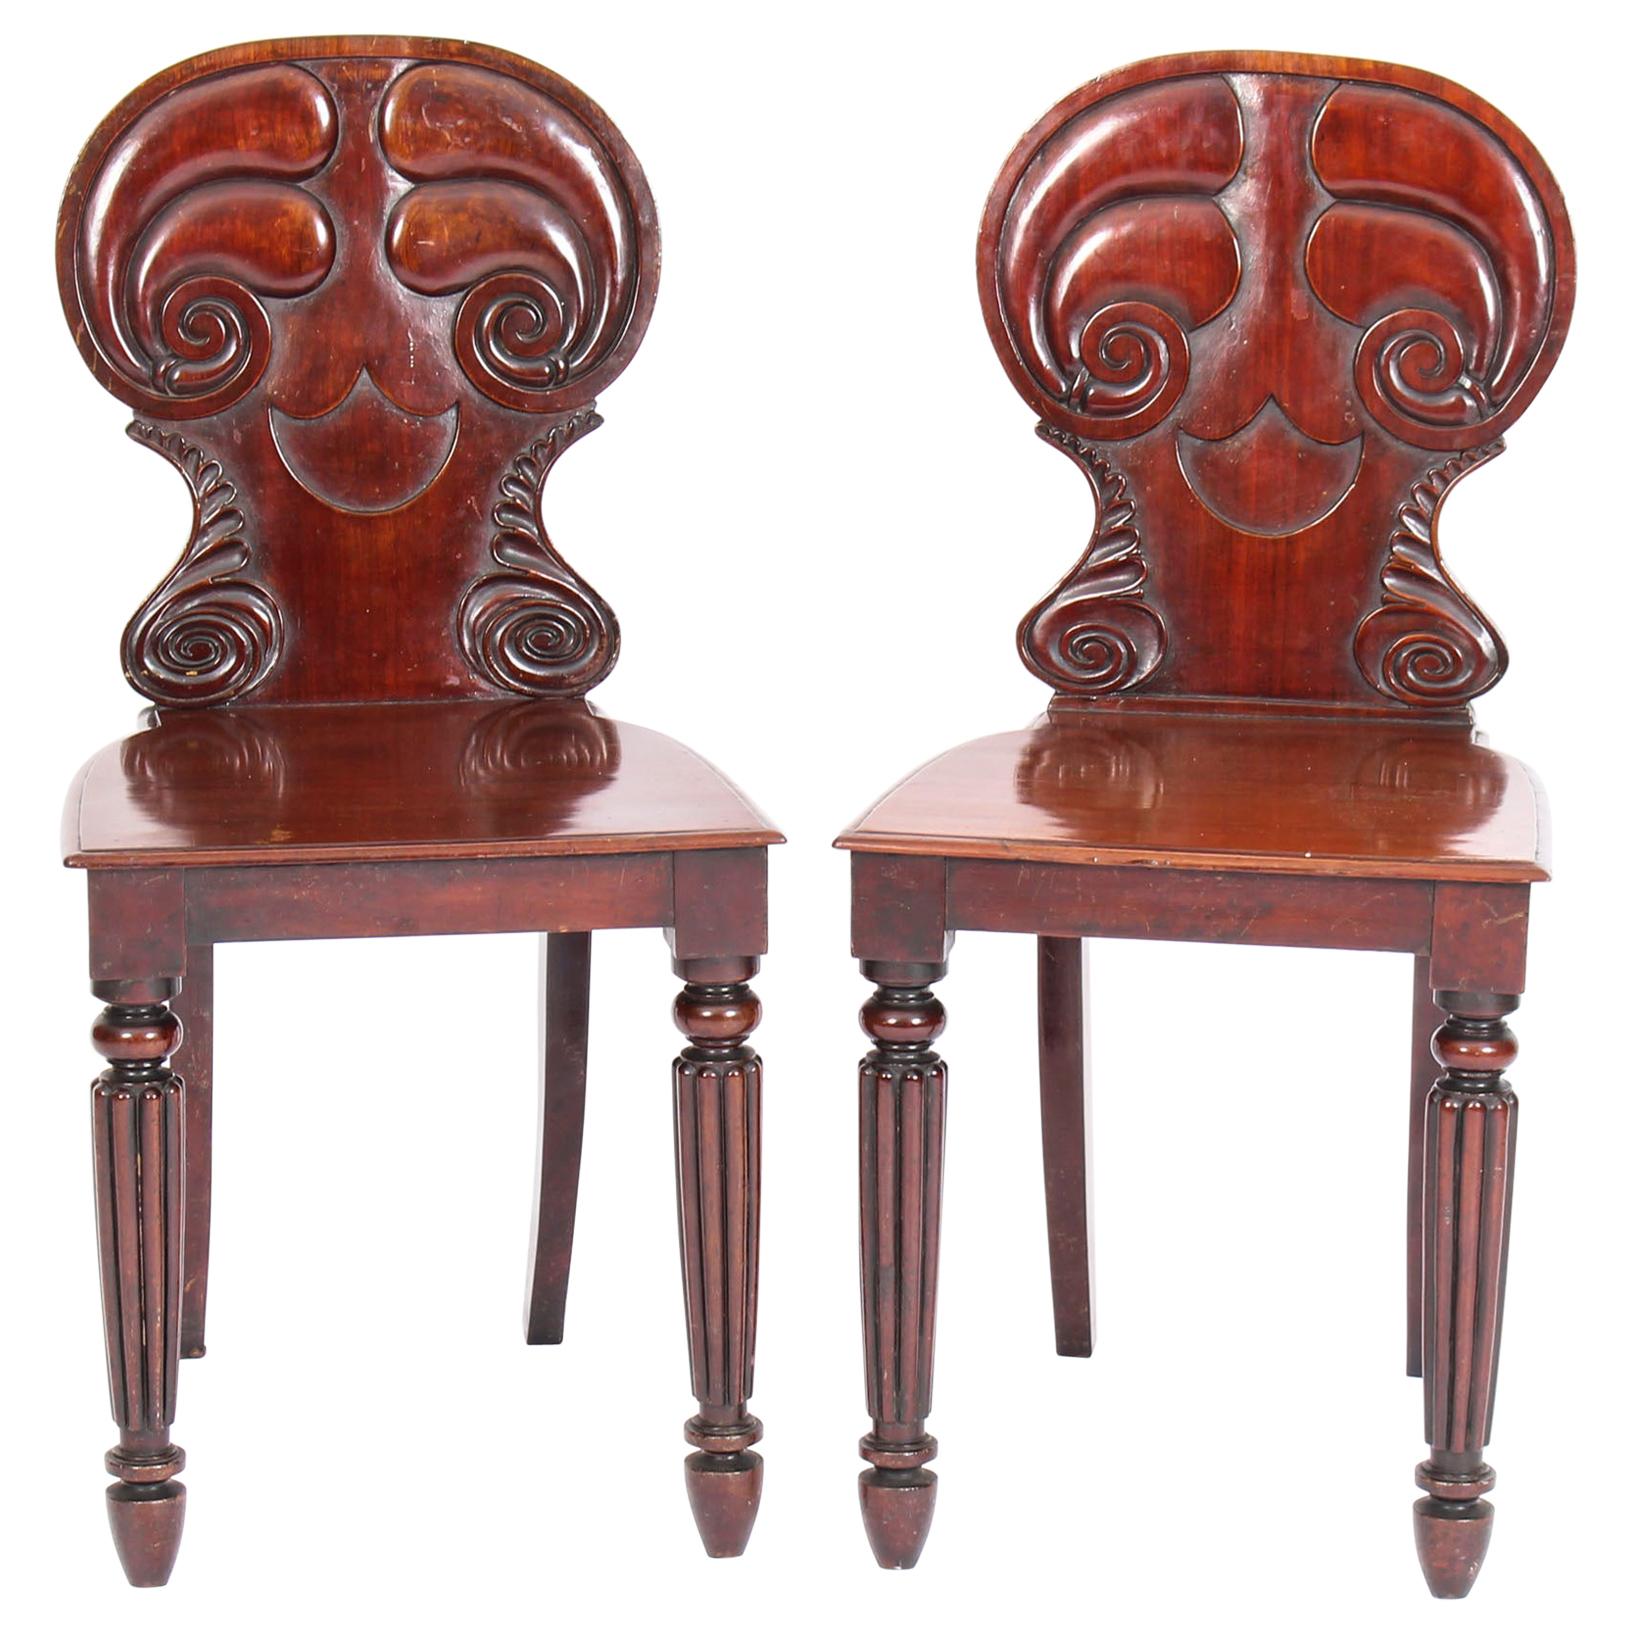 Antique Pair of Regency Mahogany Hall Chairs by Gilllows, 19th Century